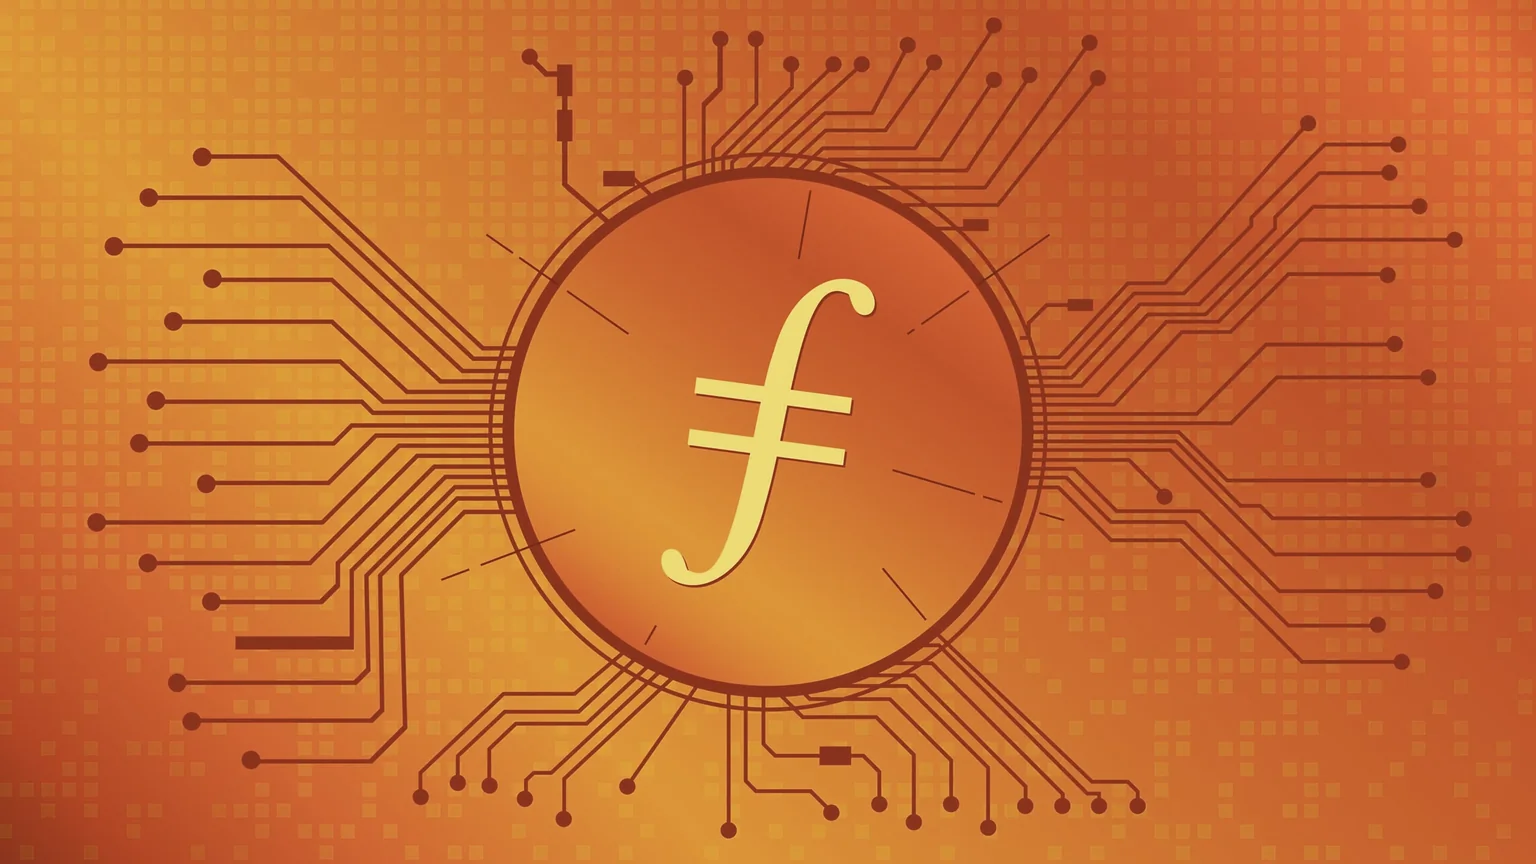 Filecoin is a global storage network. Image: Shutterstock.